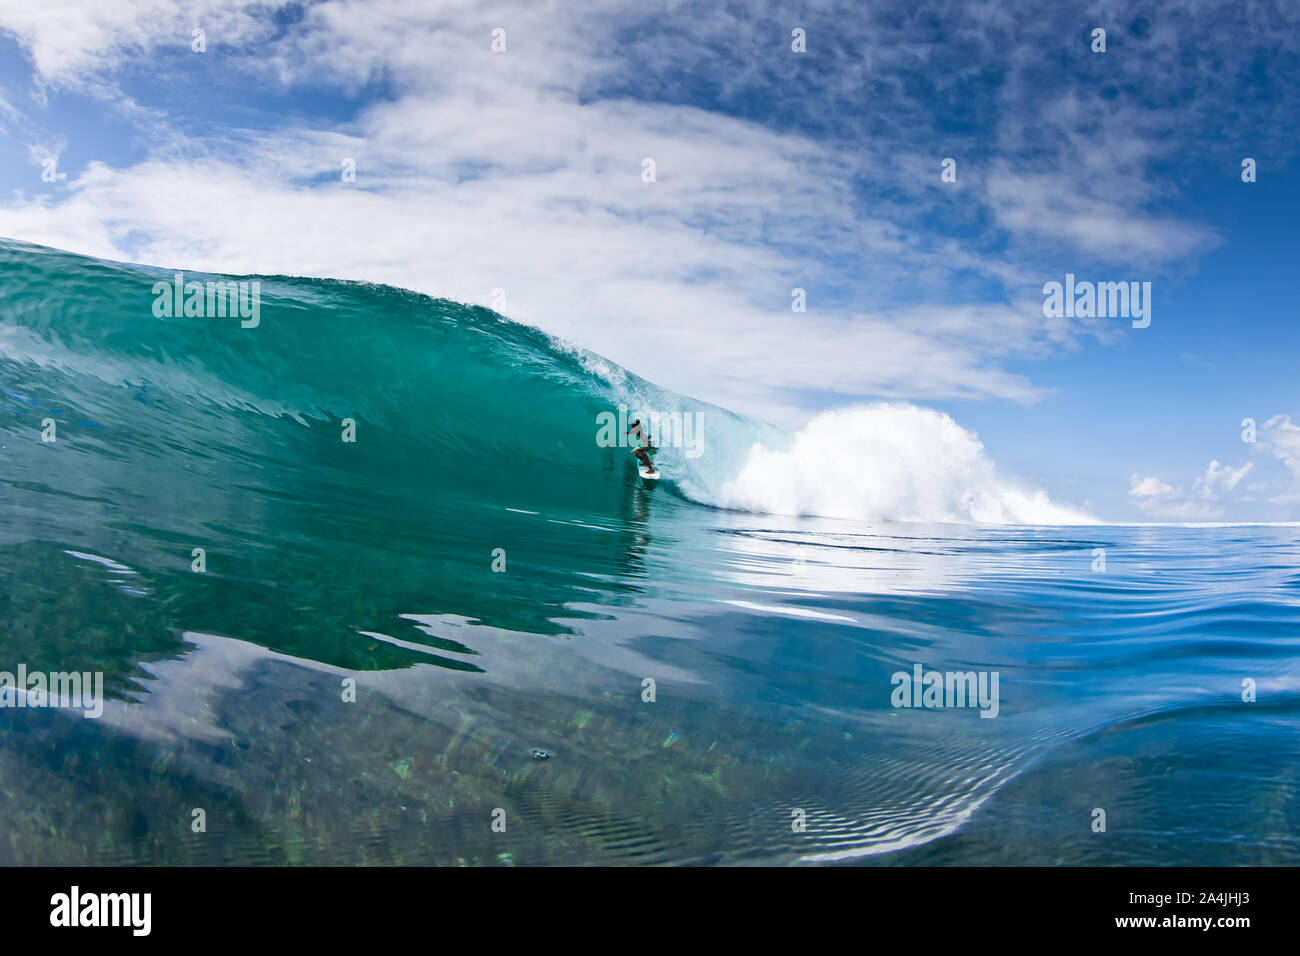 Surfer surfing tube barrel section of the big crushing wave in crystal clear water in Mentawai islands, Indonesia Stock Photo